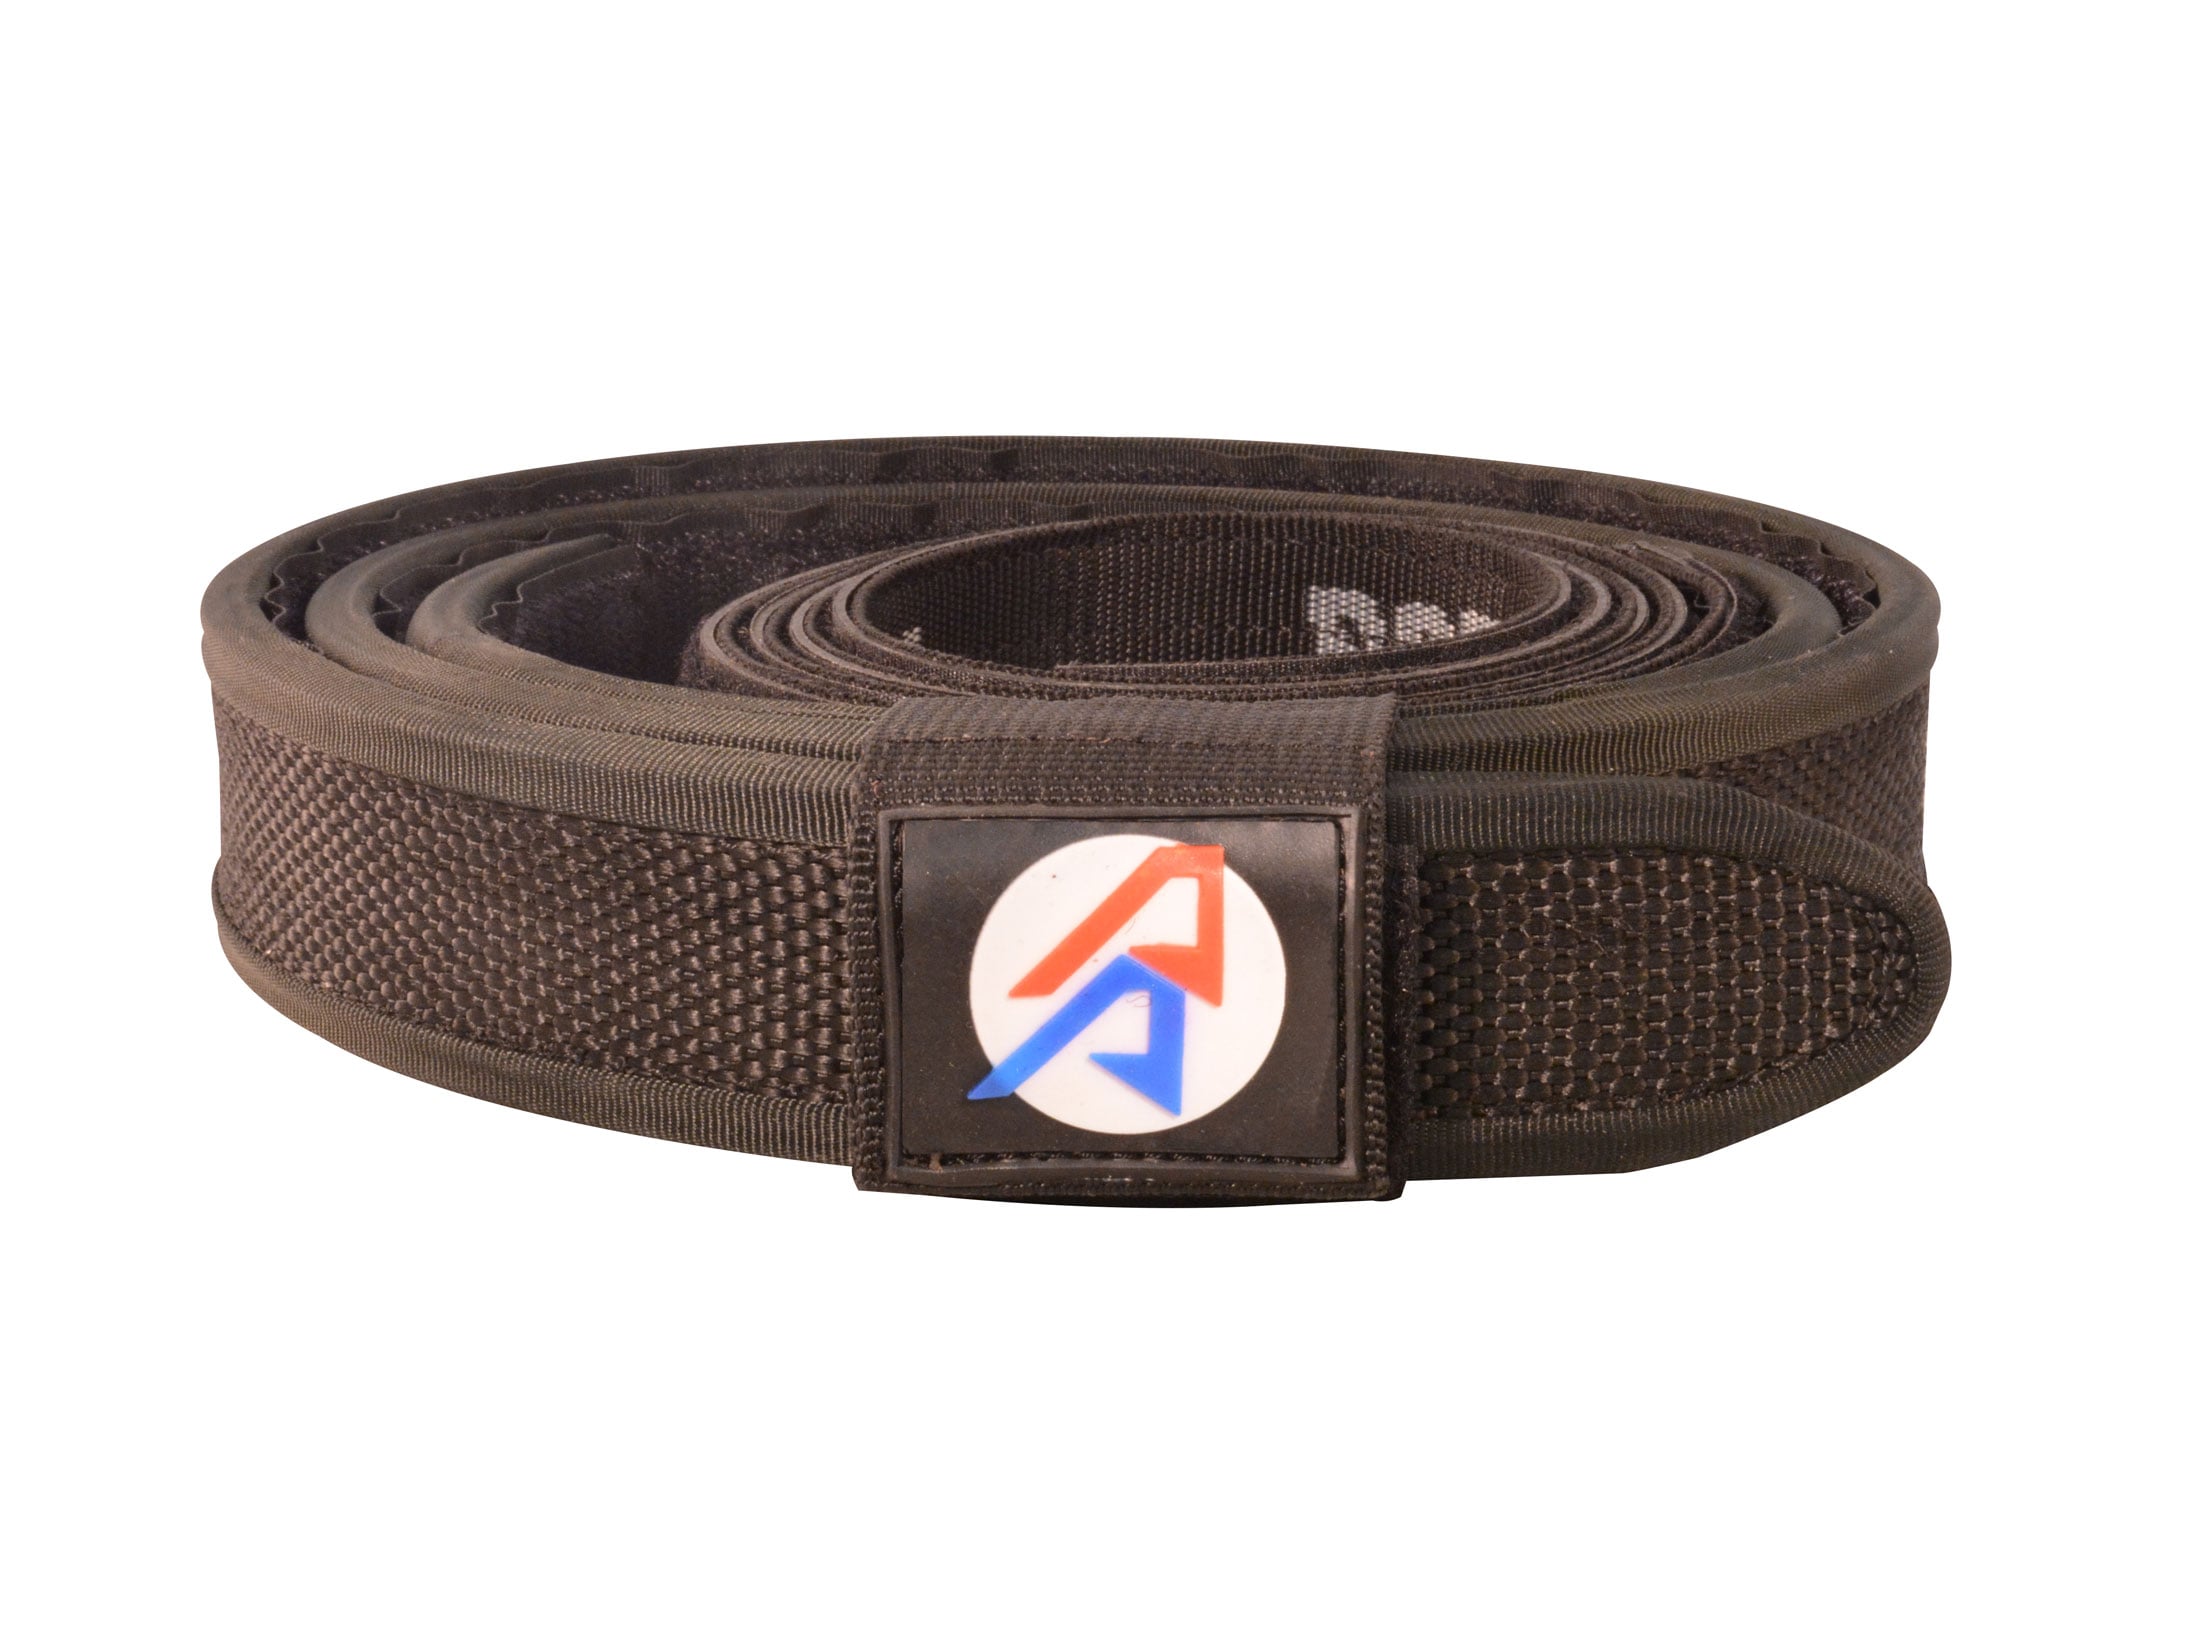 CR Speed Premium Velcro Patch - Durable Hook-and-Loop Fastening Solution